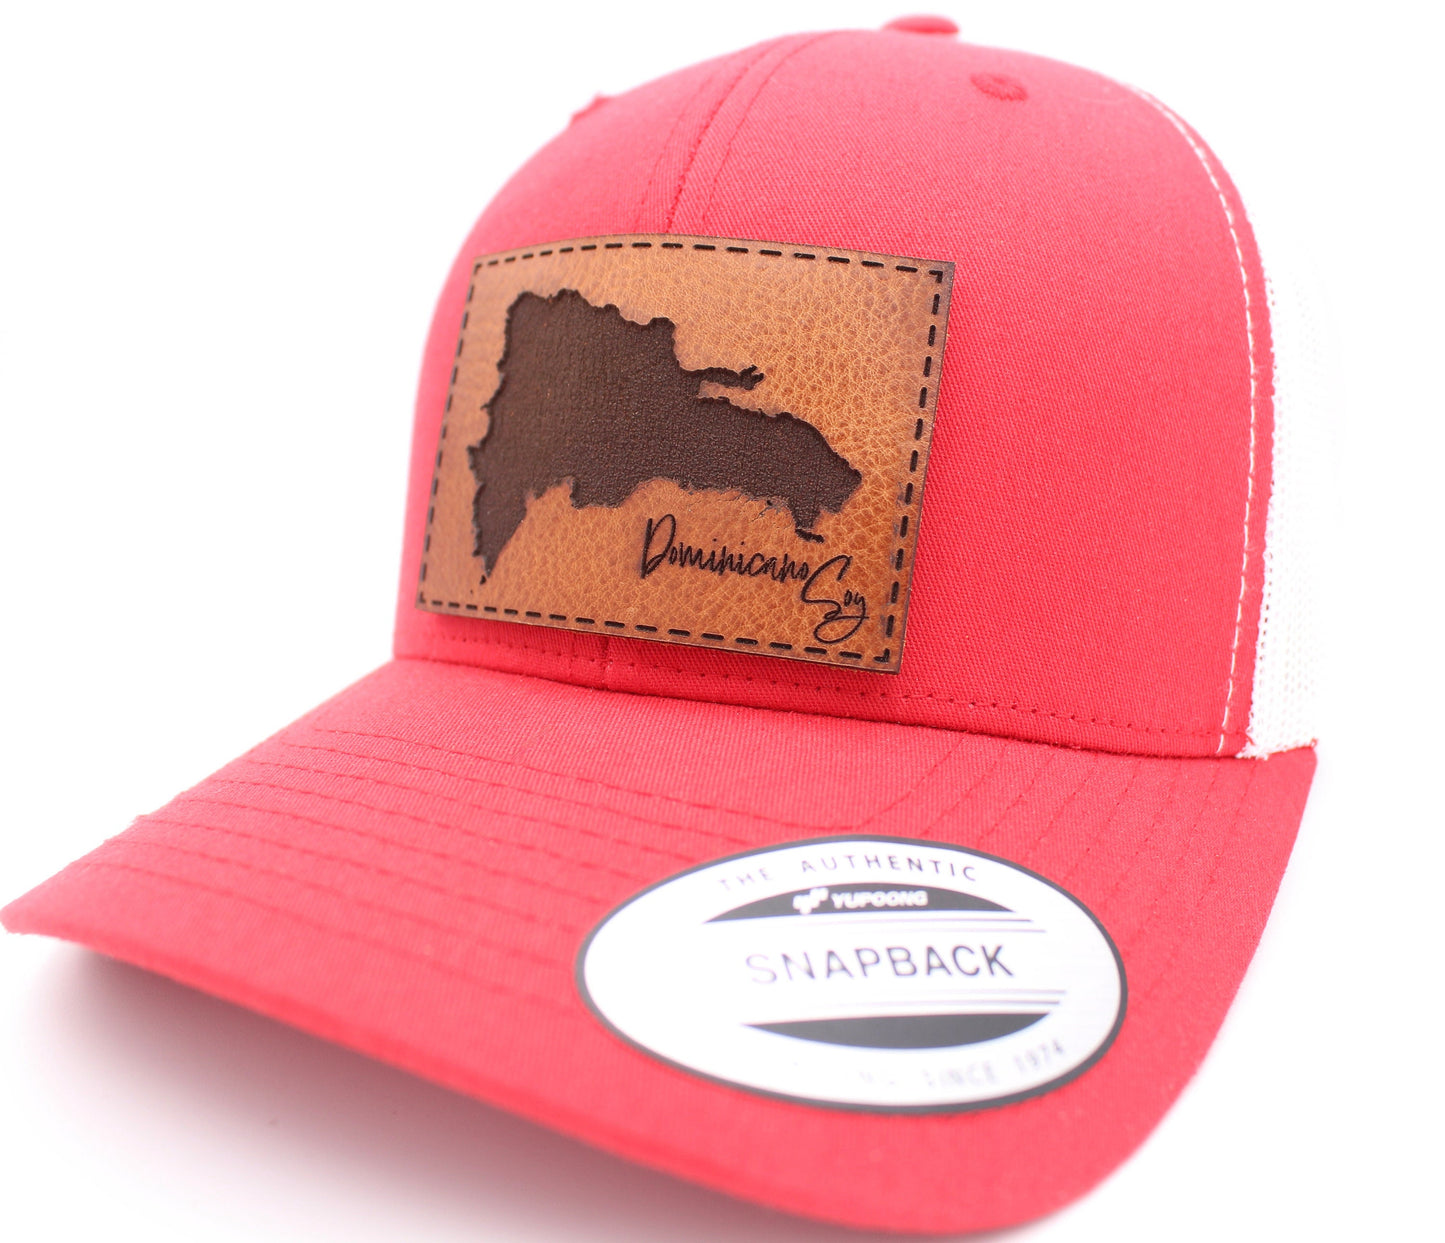 Dominicano Soy Leather Patch Hat | Dominican Republic Trucker Hat